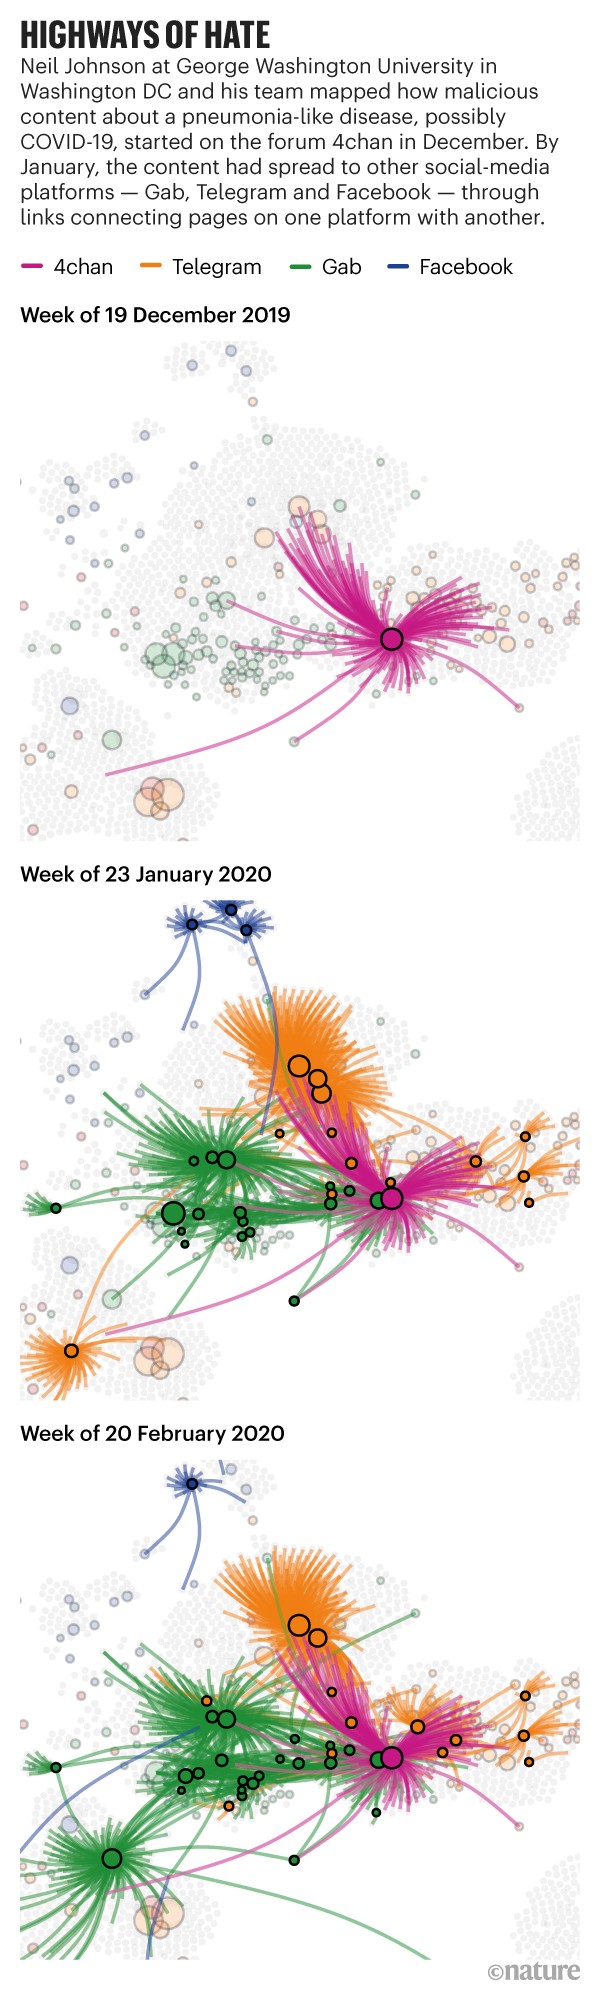 Highways of hate: Network diagrams showing how malicious content spread amongst social networks over three months.